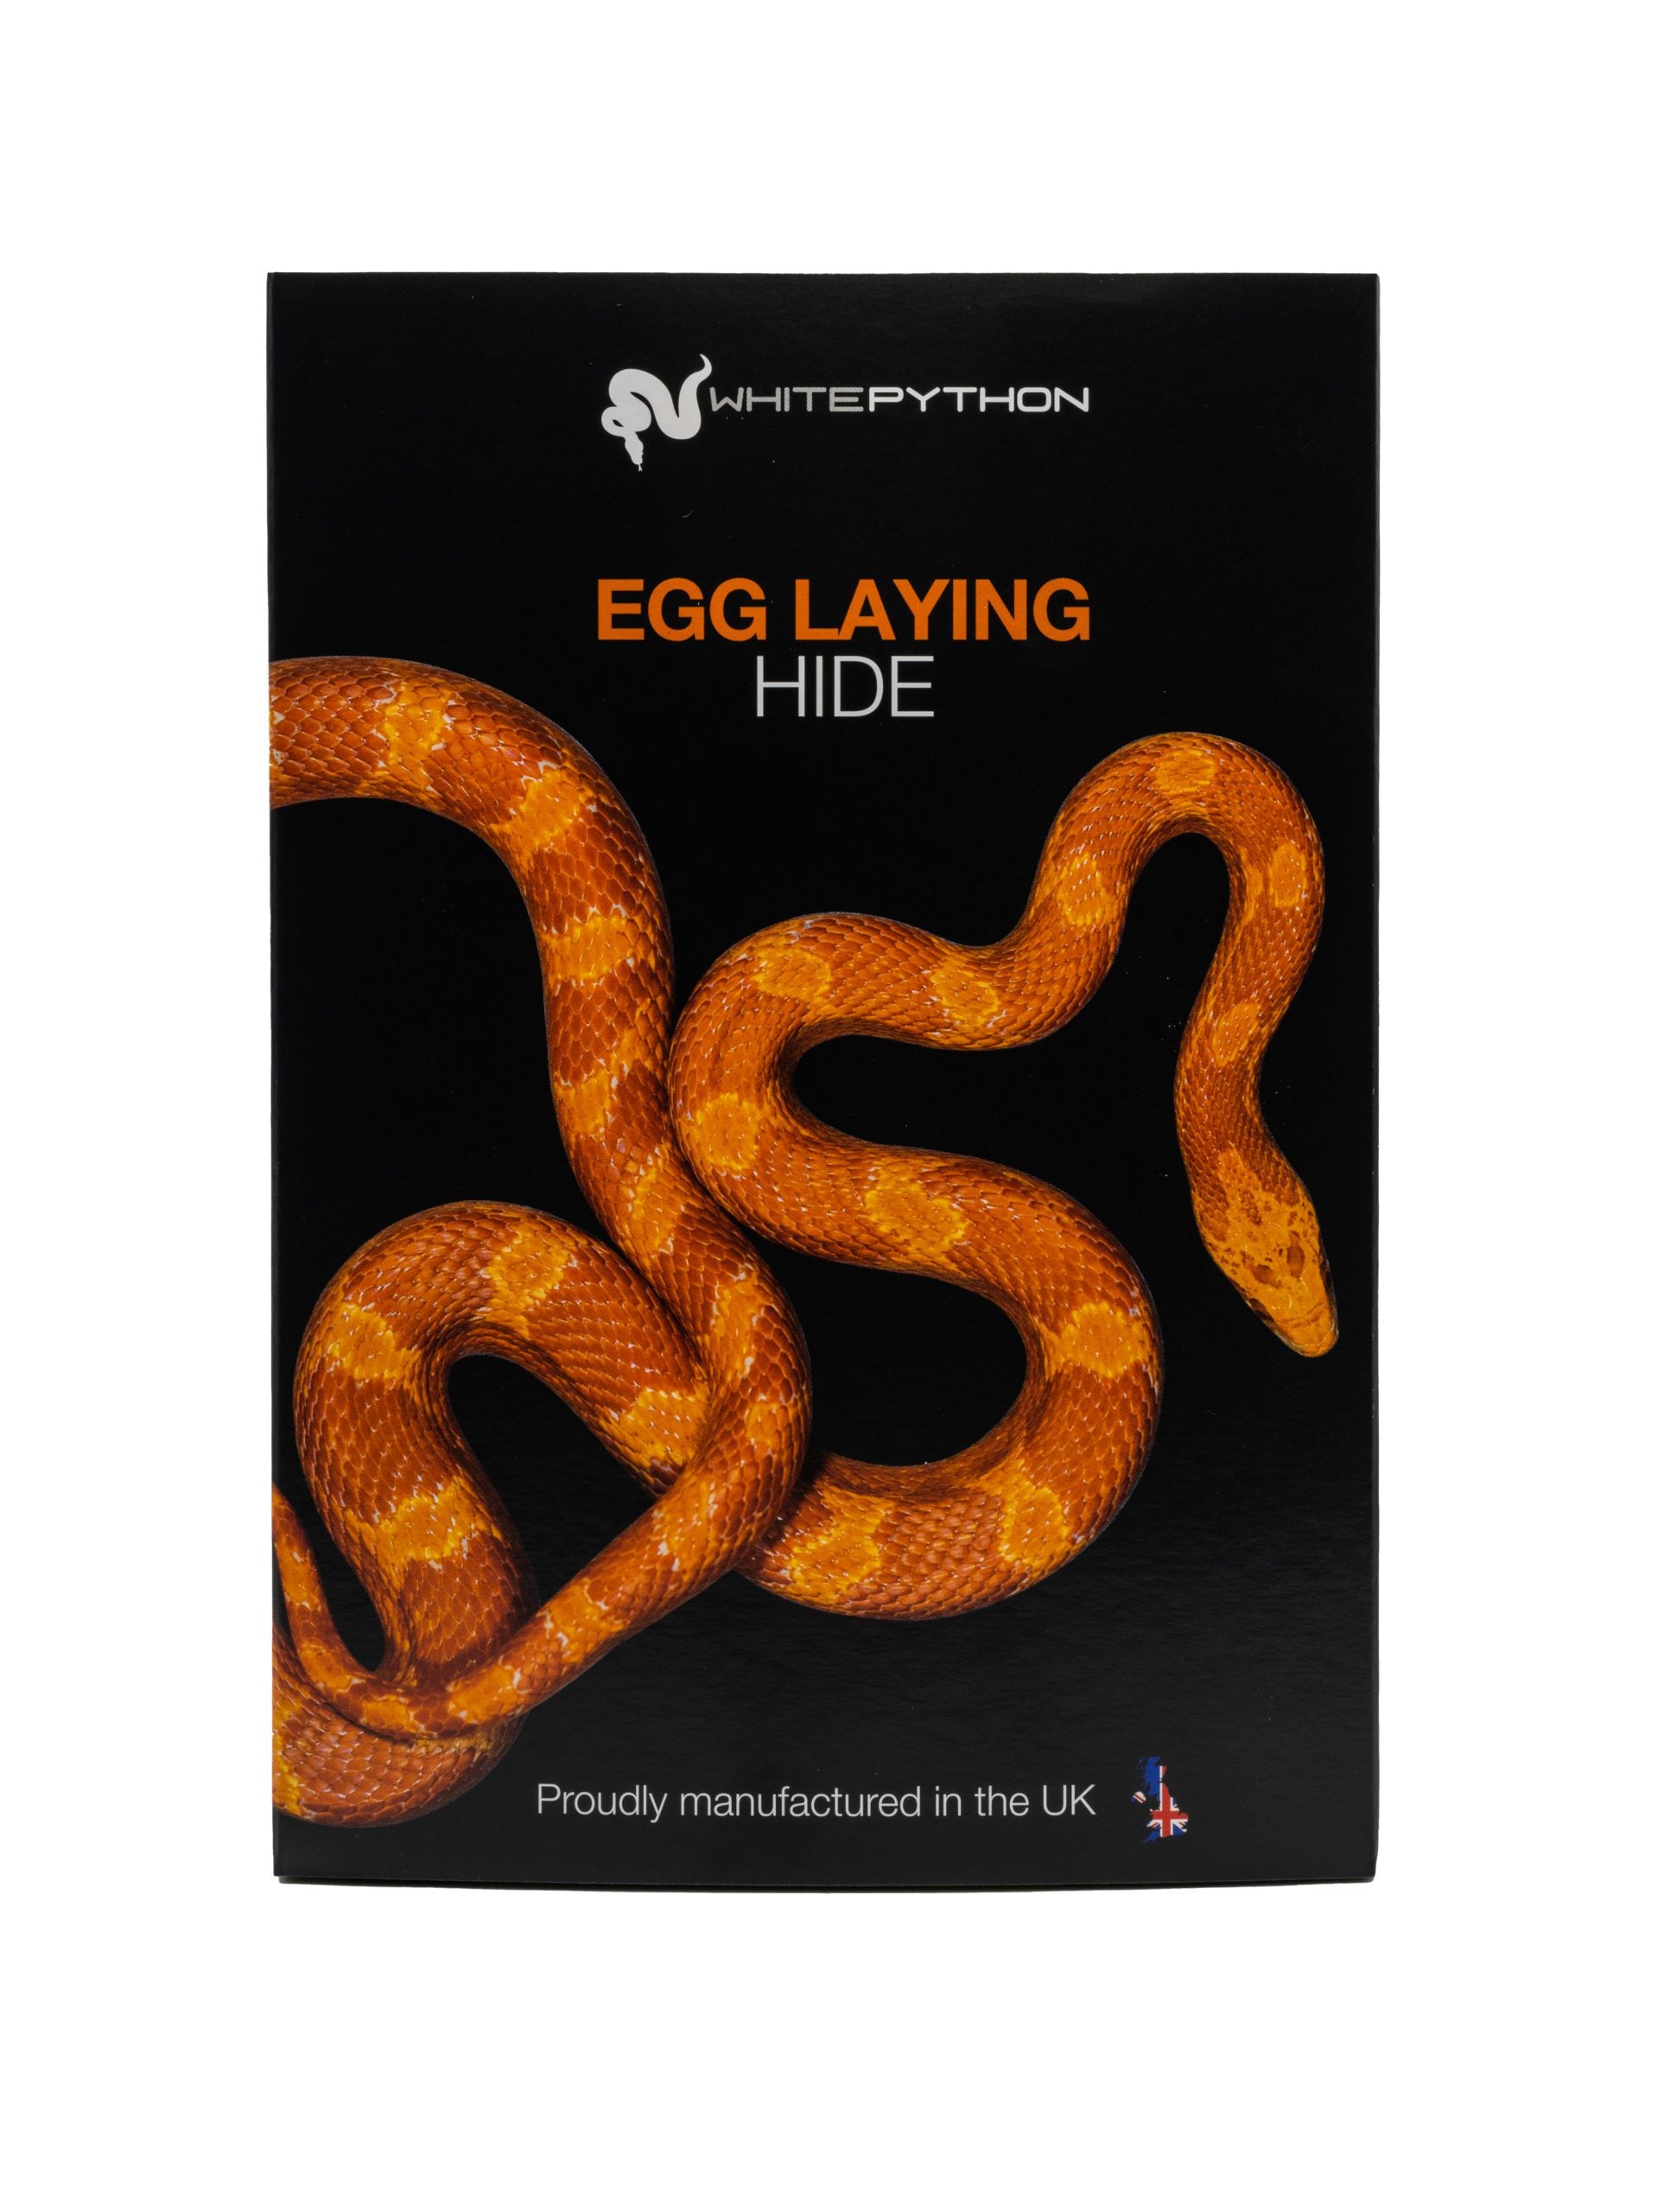 Egg laying Hide